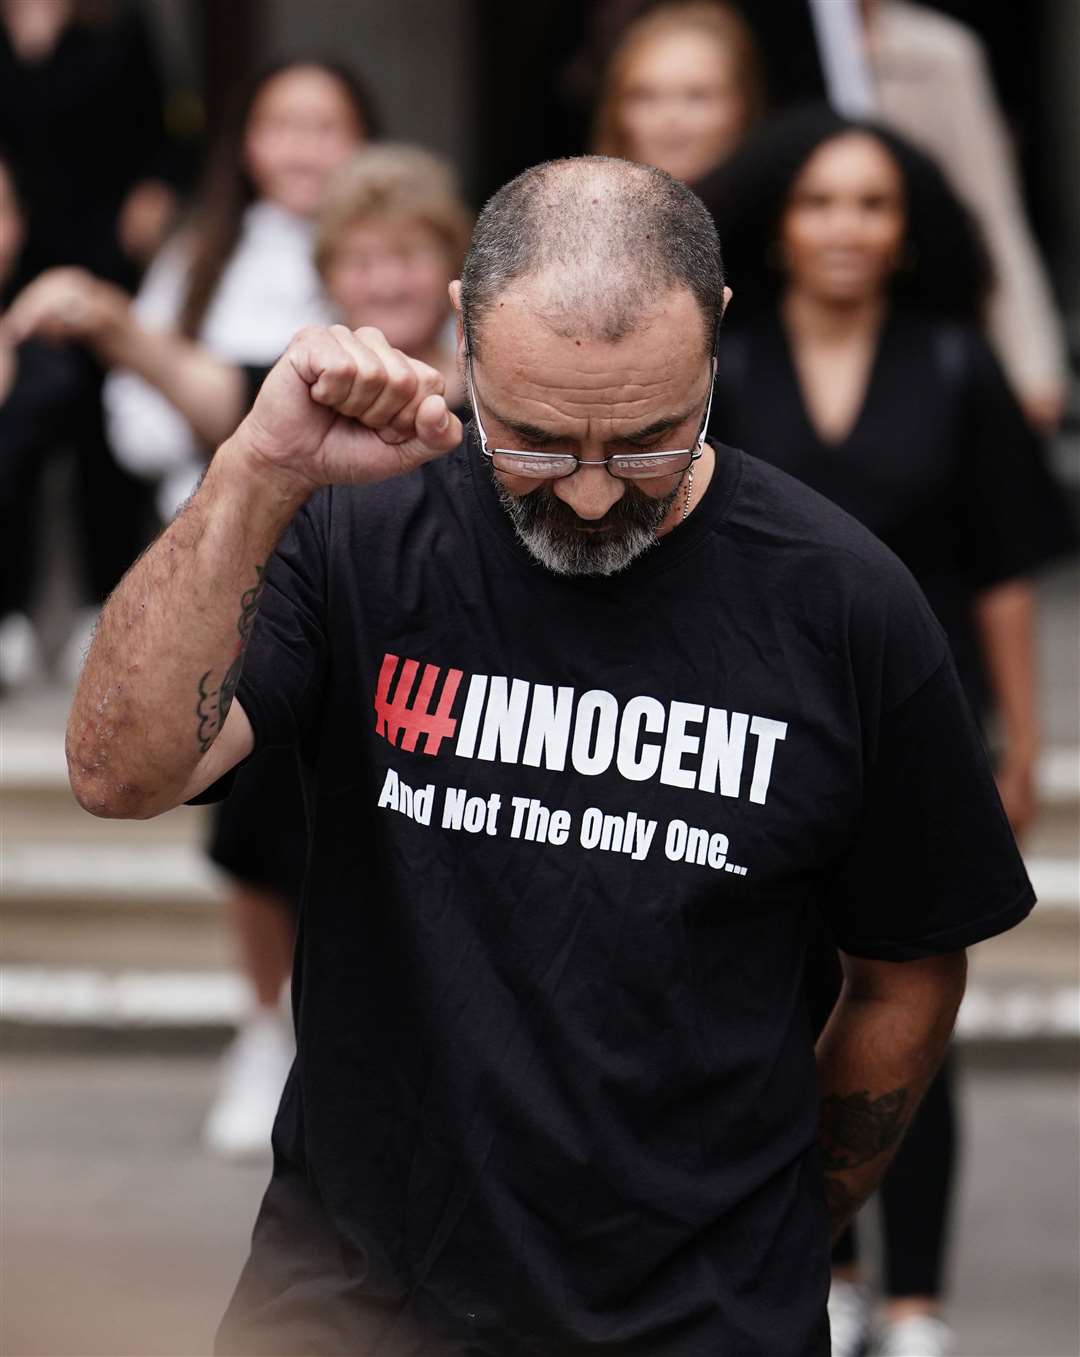 Andrew Malkinson spent an extra 10 years in prison after refusing to falsely confess (Jordan Pettitt/PA)